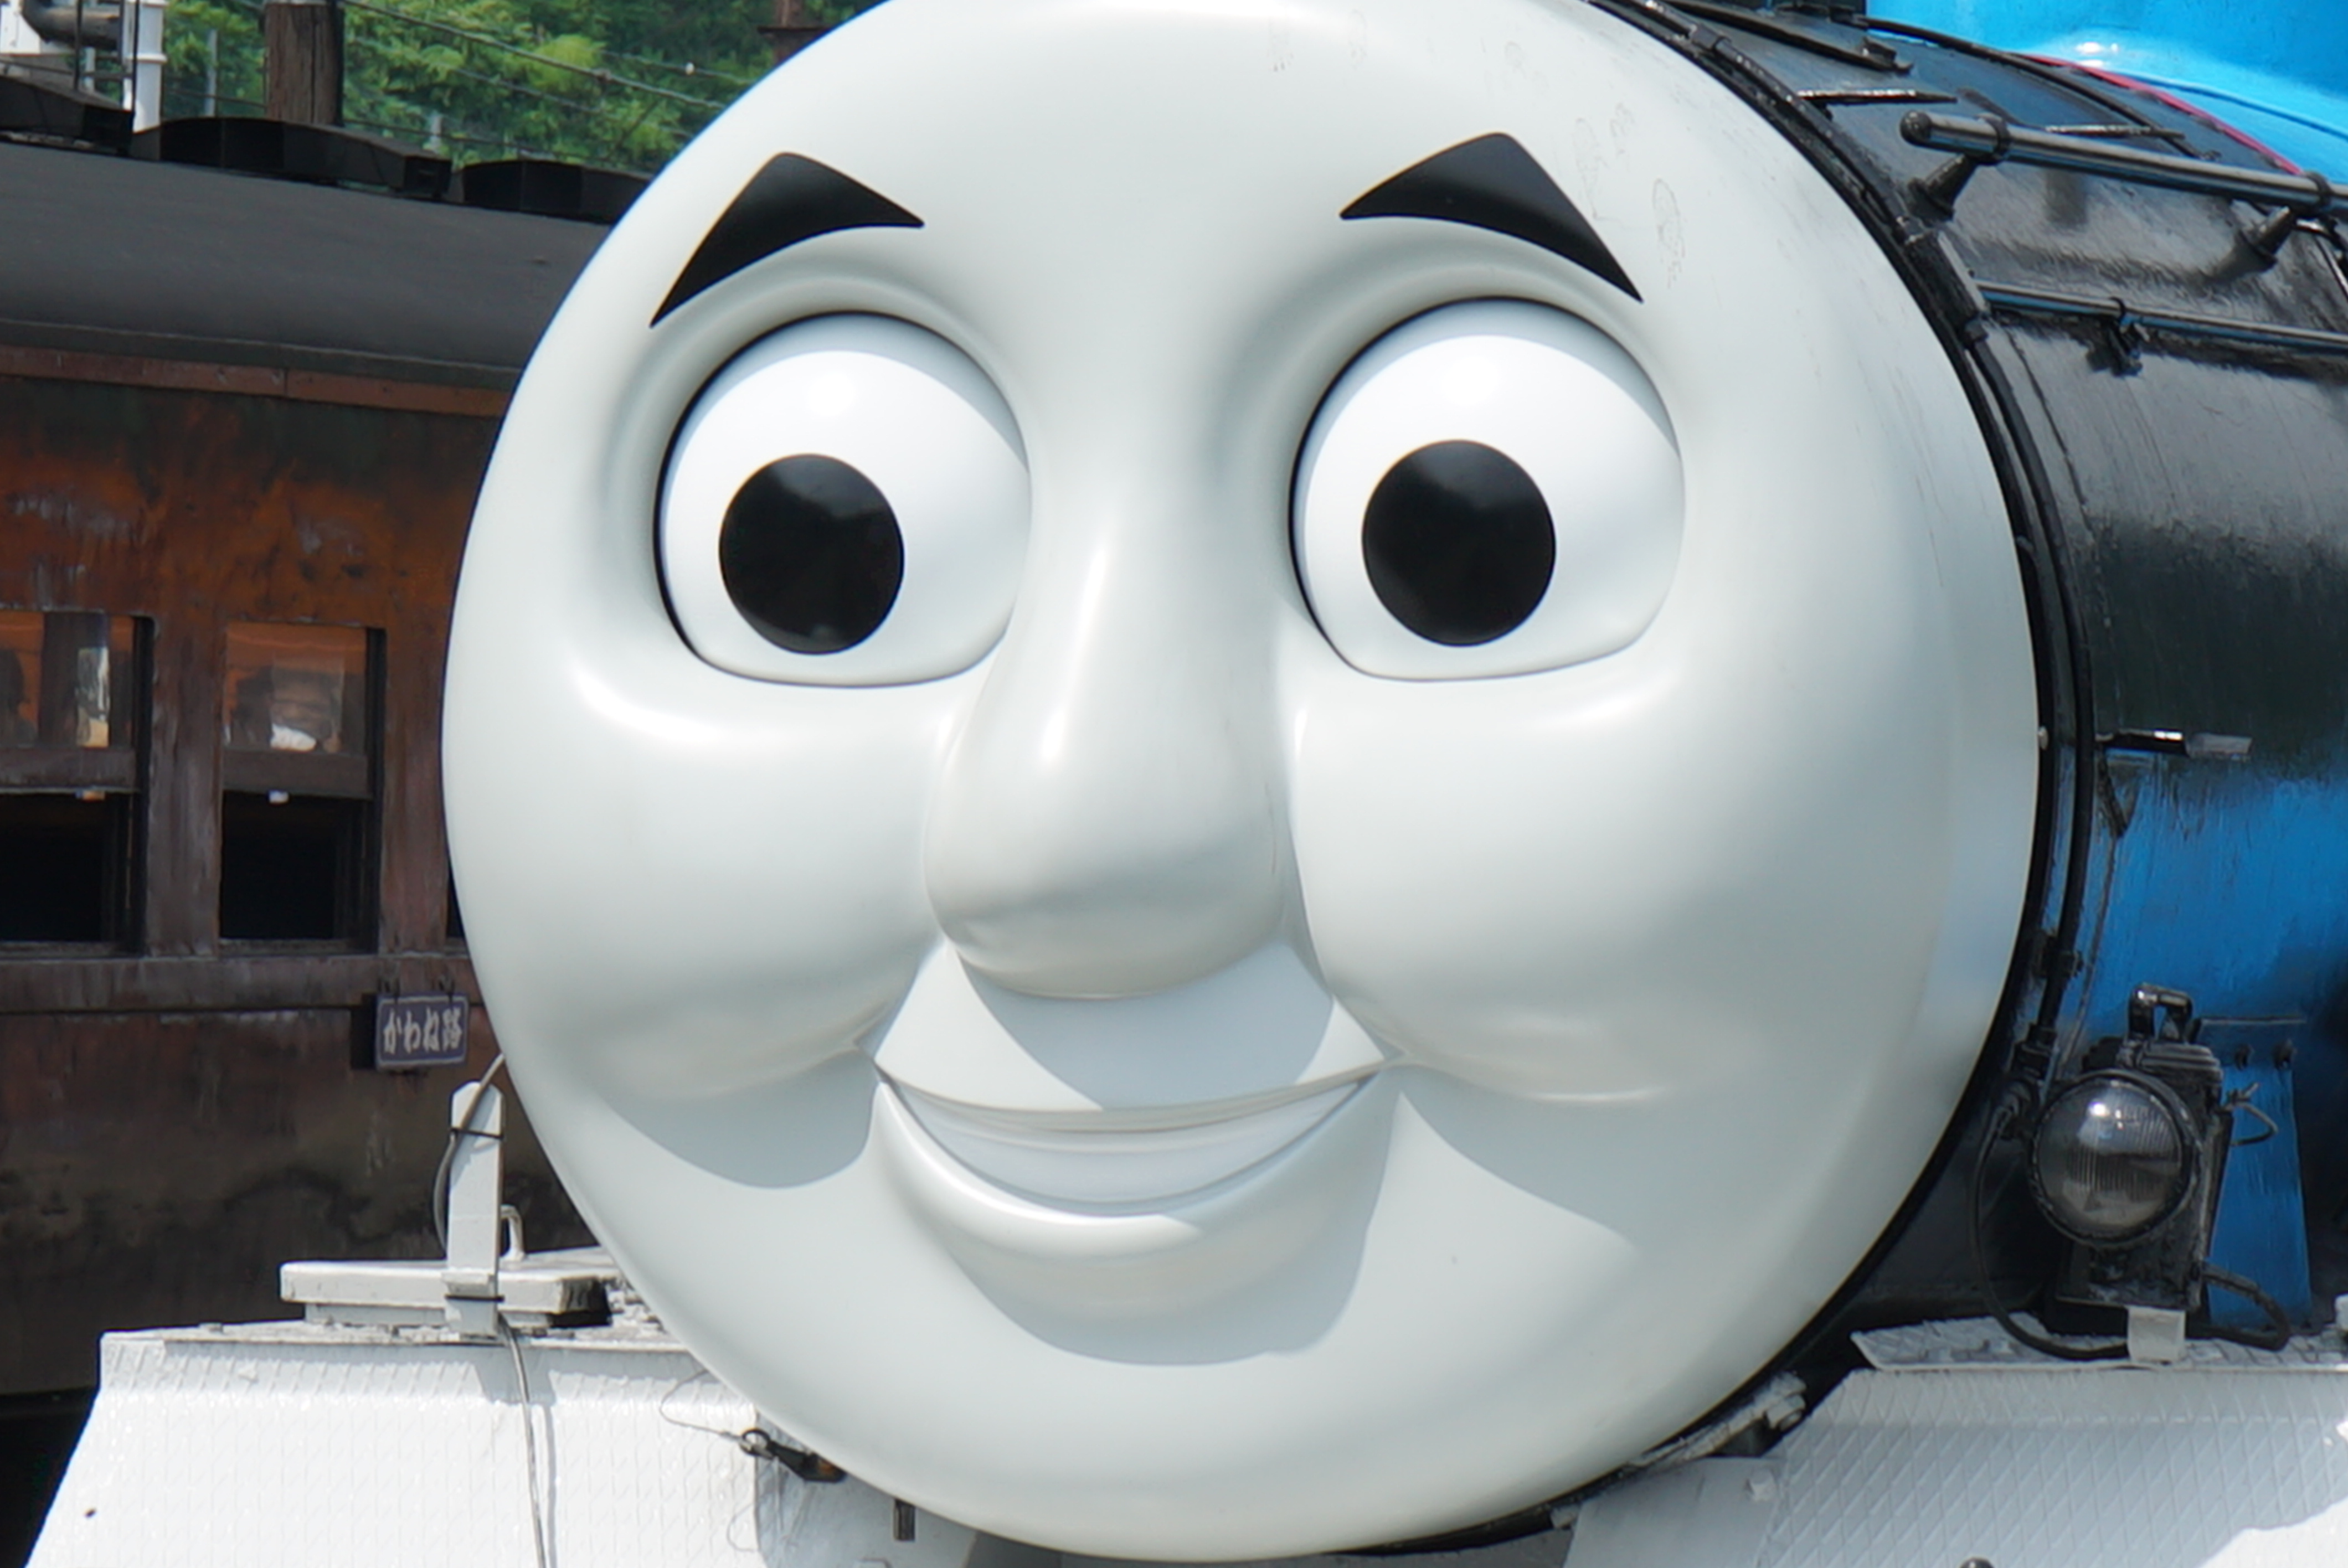 We travel to Shizuoka to come face to face with the real-life Thomas ...